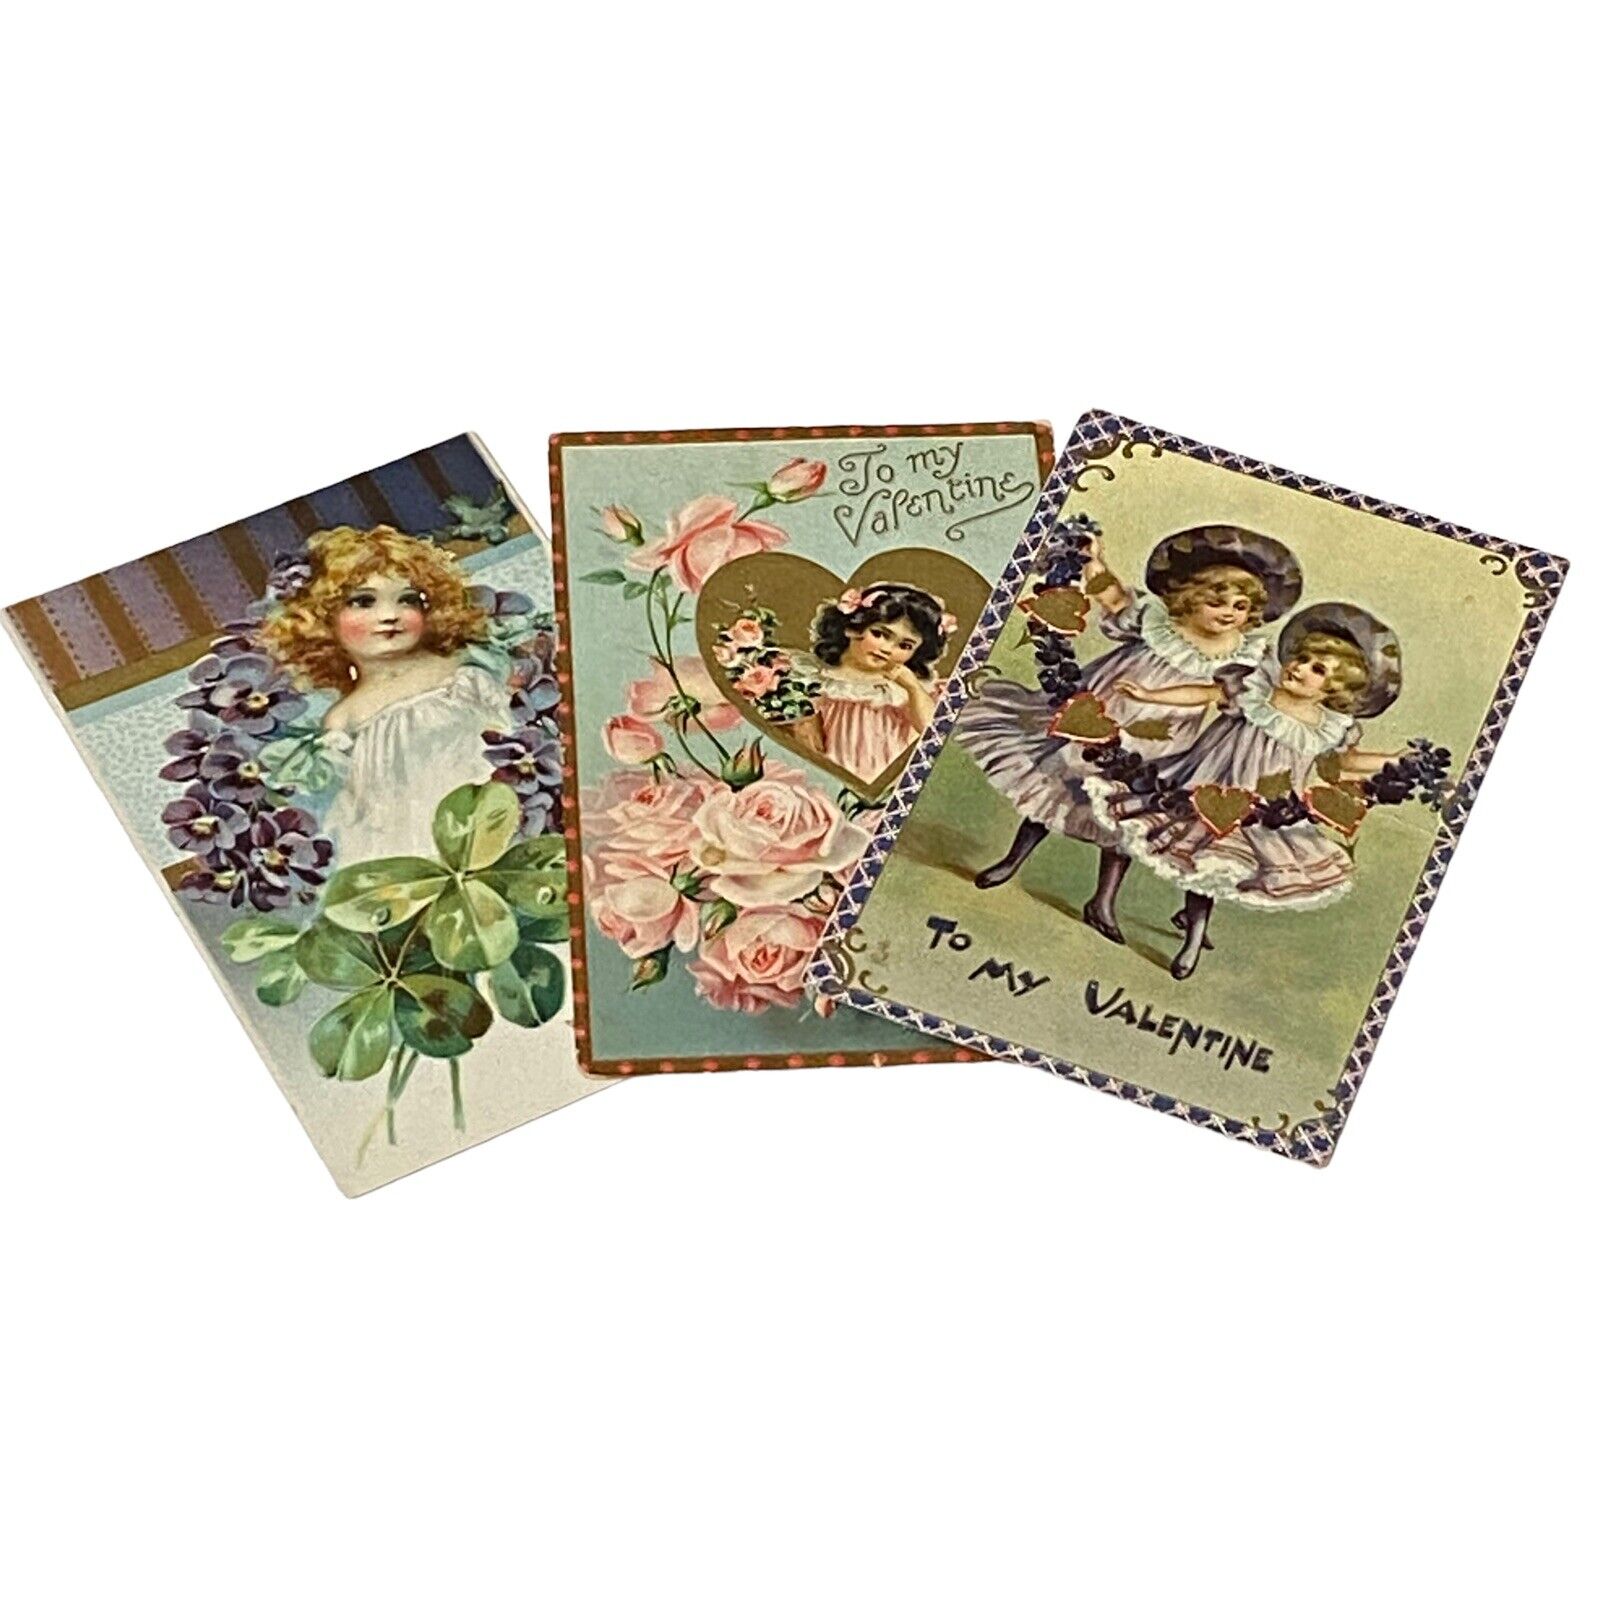 Raphael Tuck And Sons Valentine Postcards Antique Lot Of 3